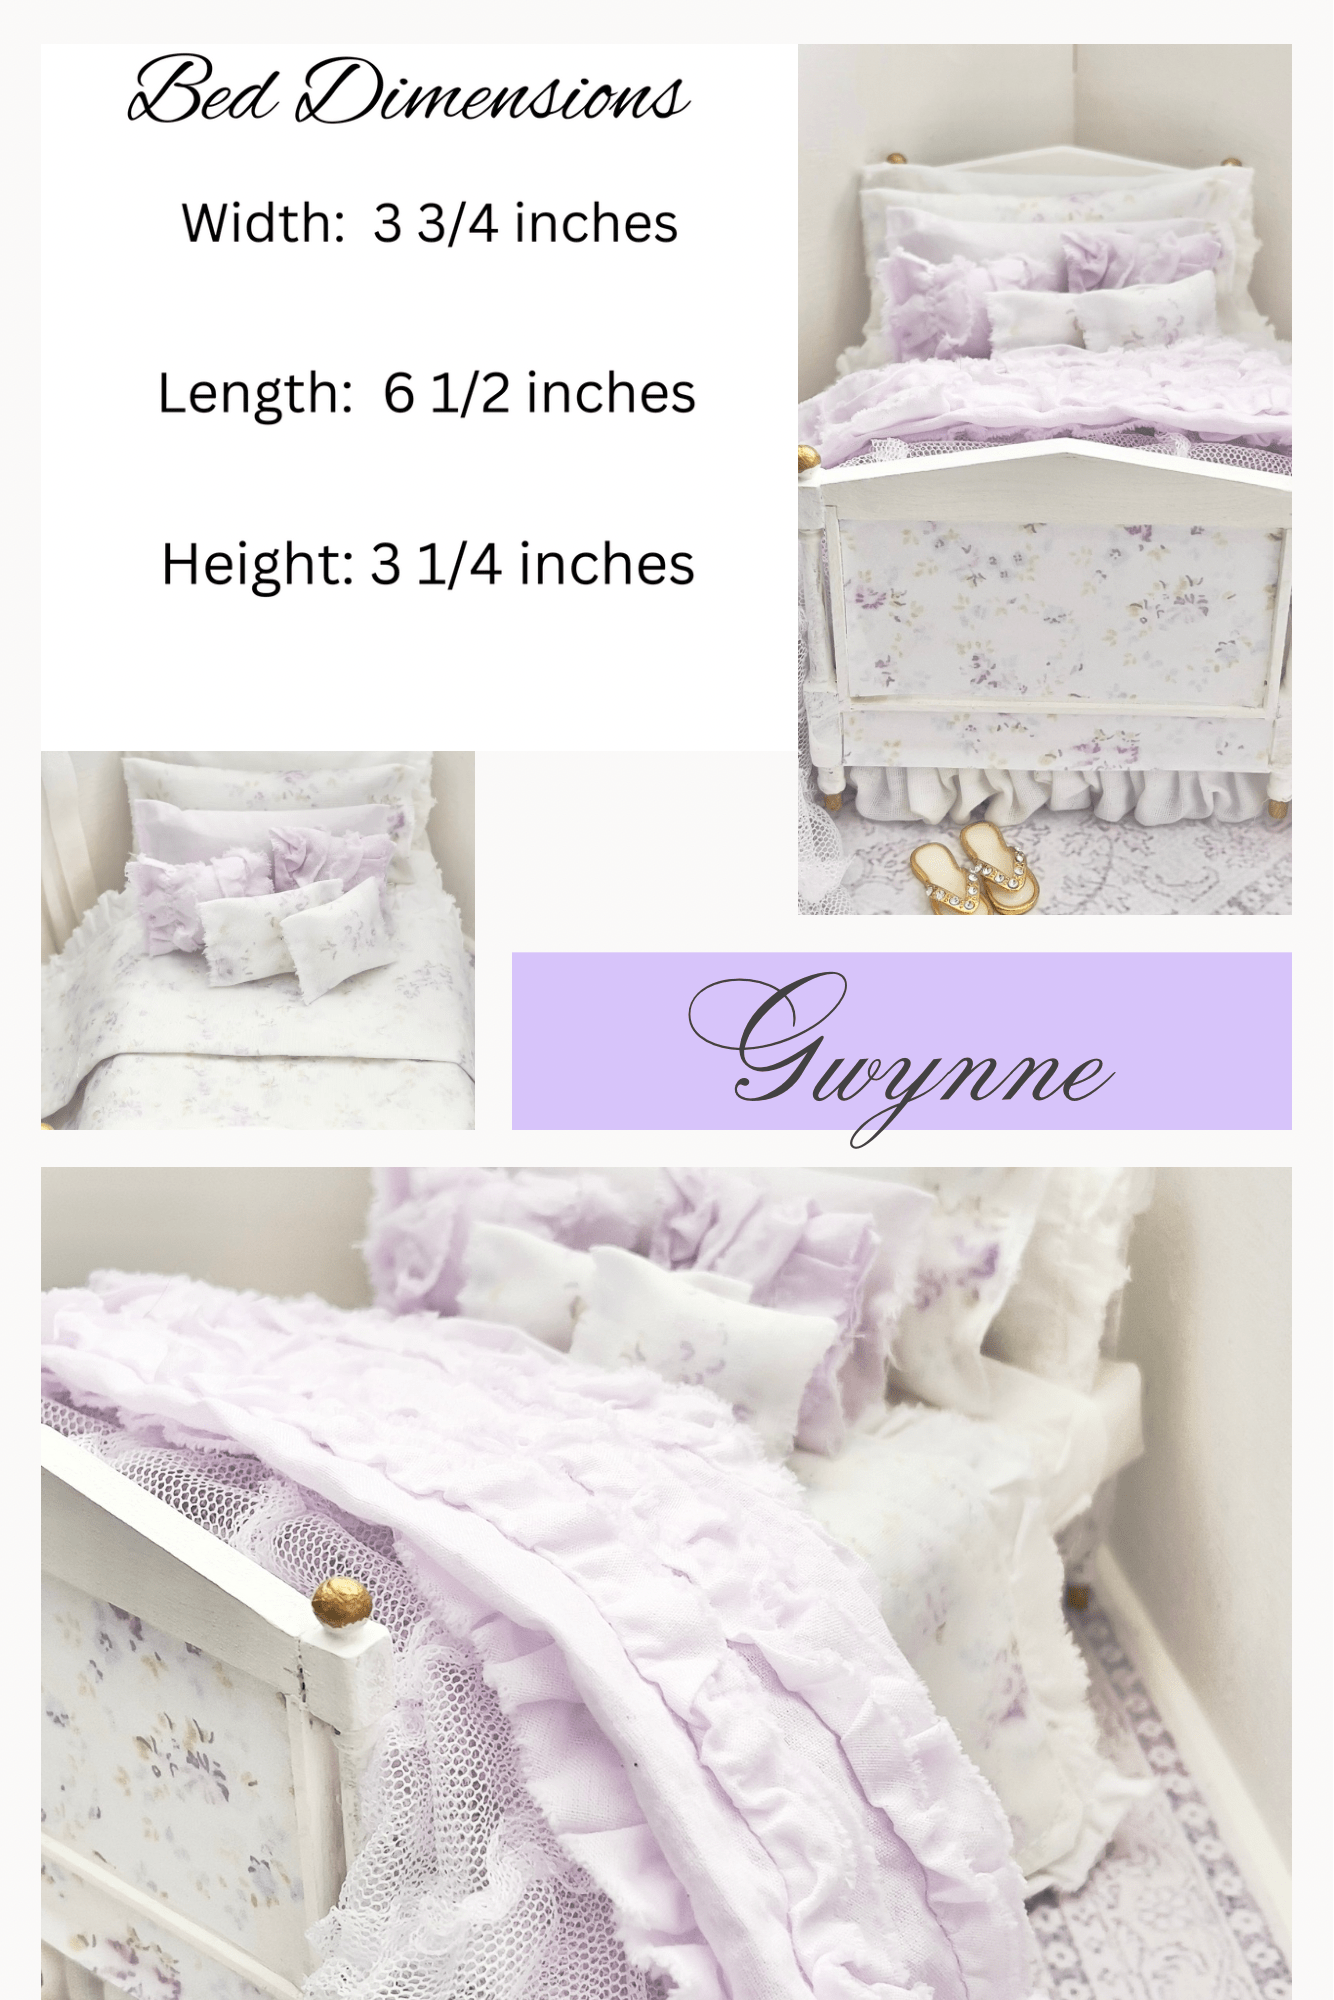 Chantallena Doll House Dressed 1:12 Scale Bed | White Decoupage Bed with Lavender Cotton Bedding Set | Gwynne